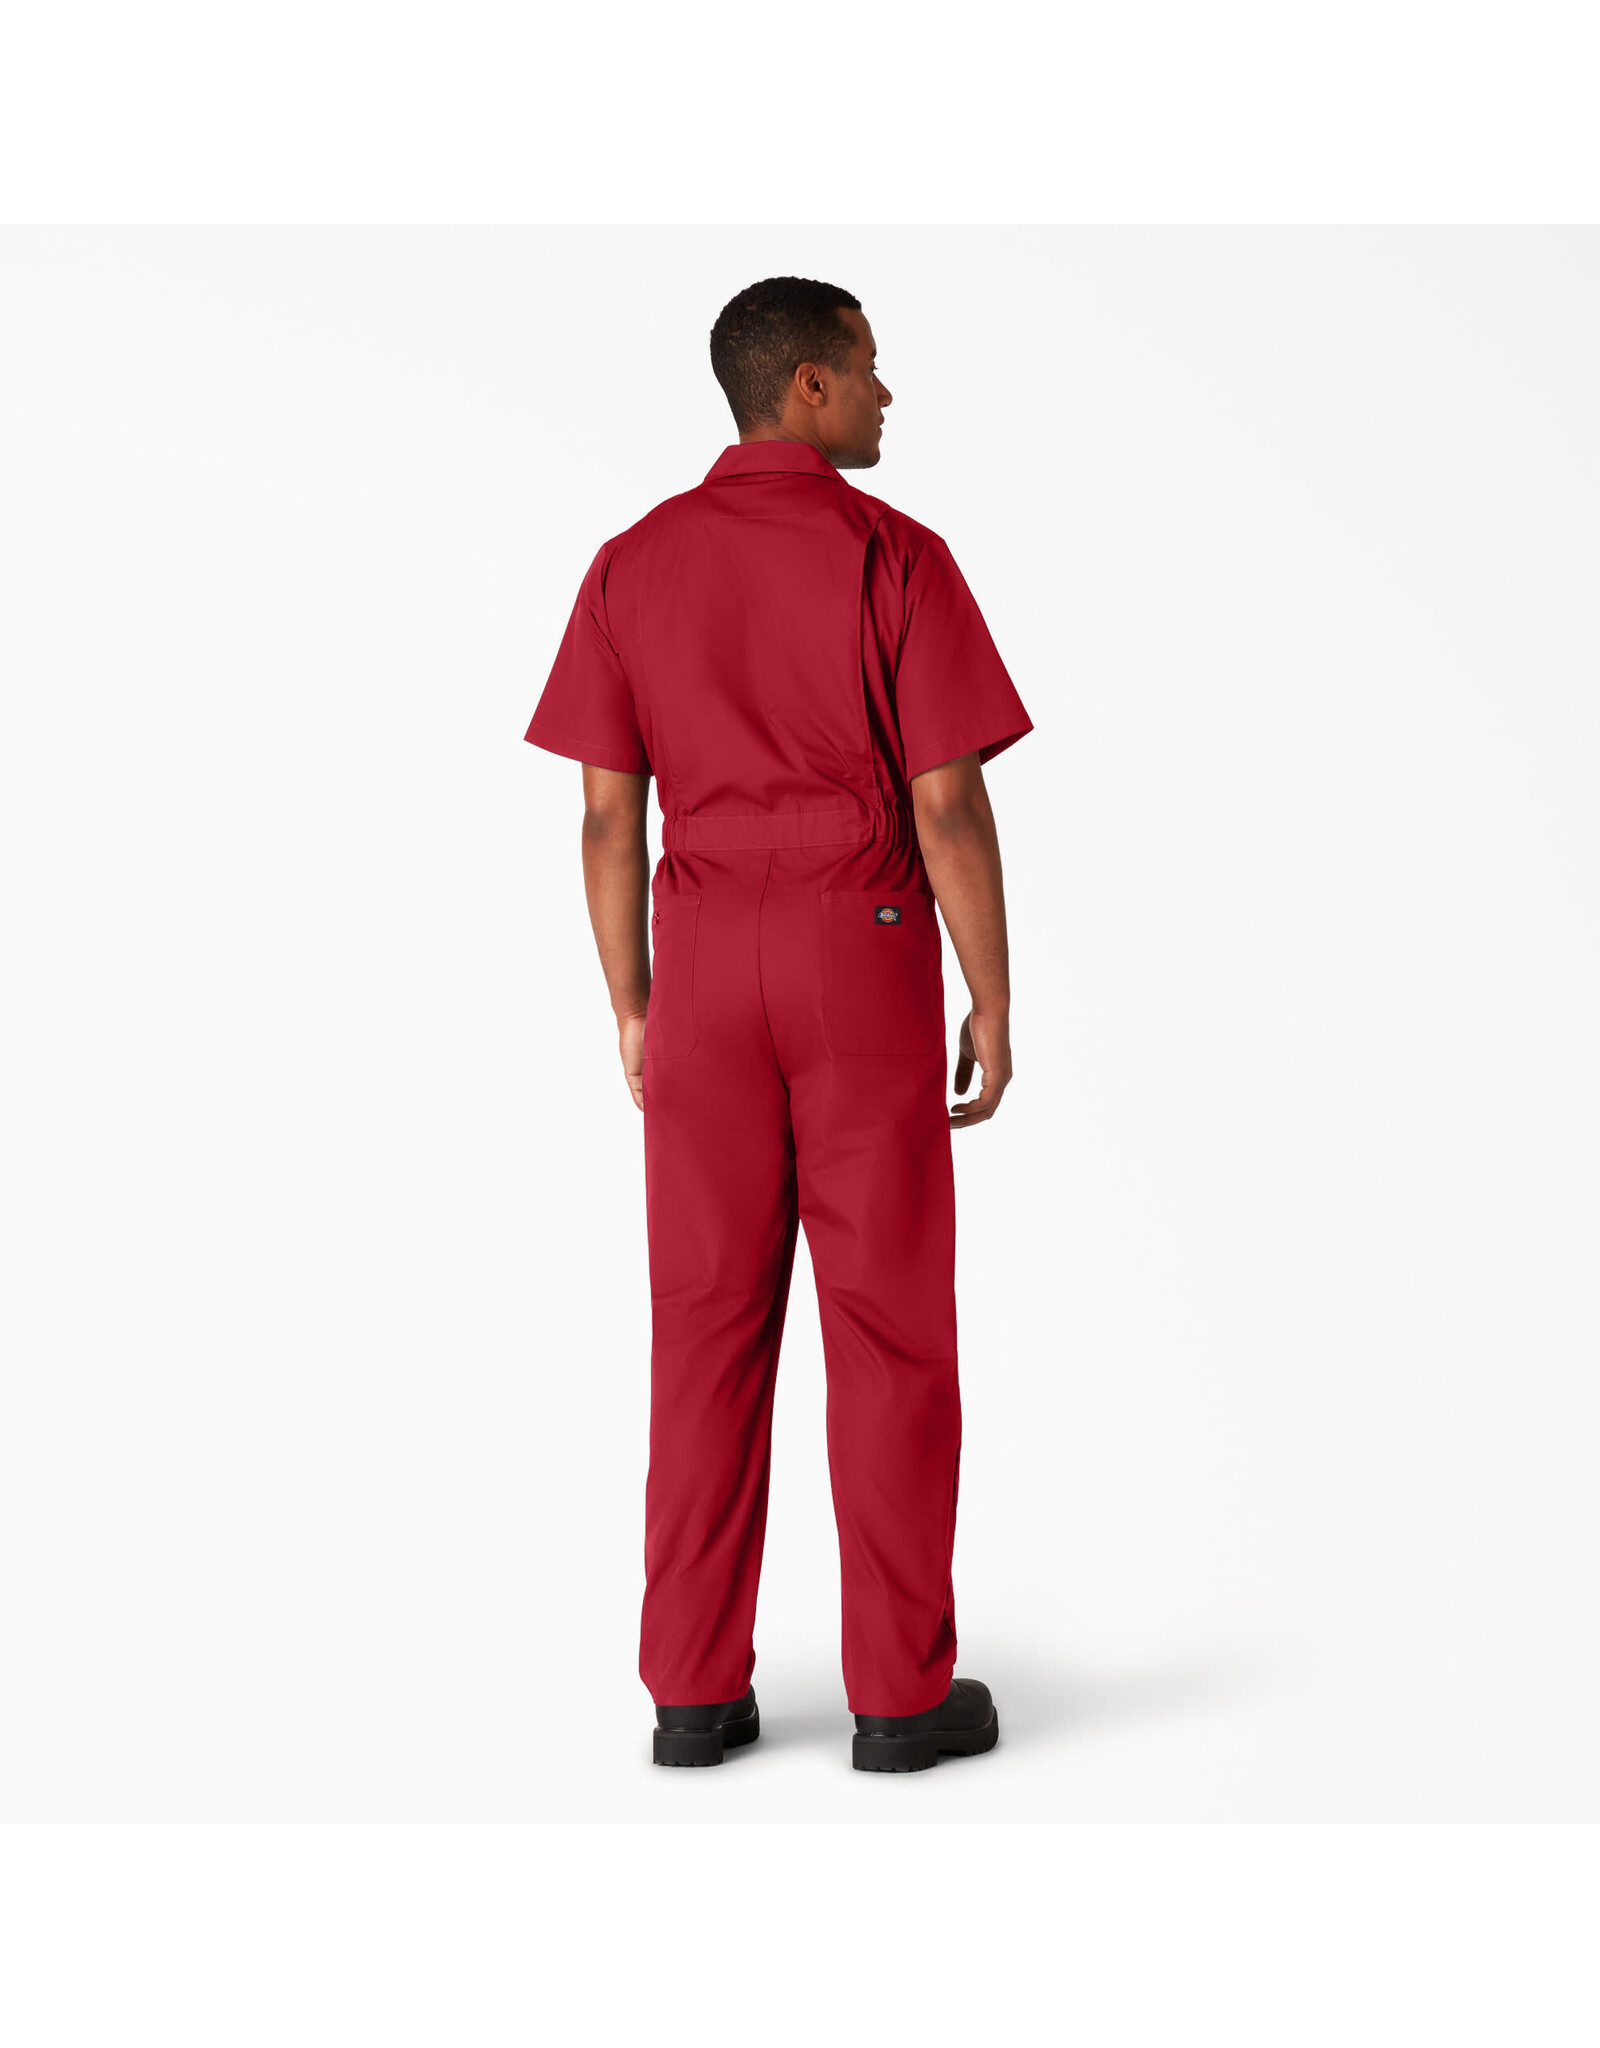 DICKIES Short Sleeve Coveralls Red - 33999RD